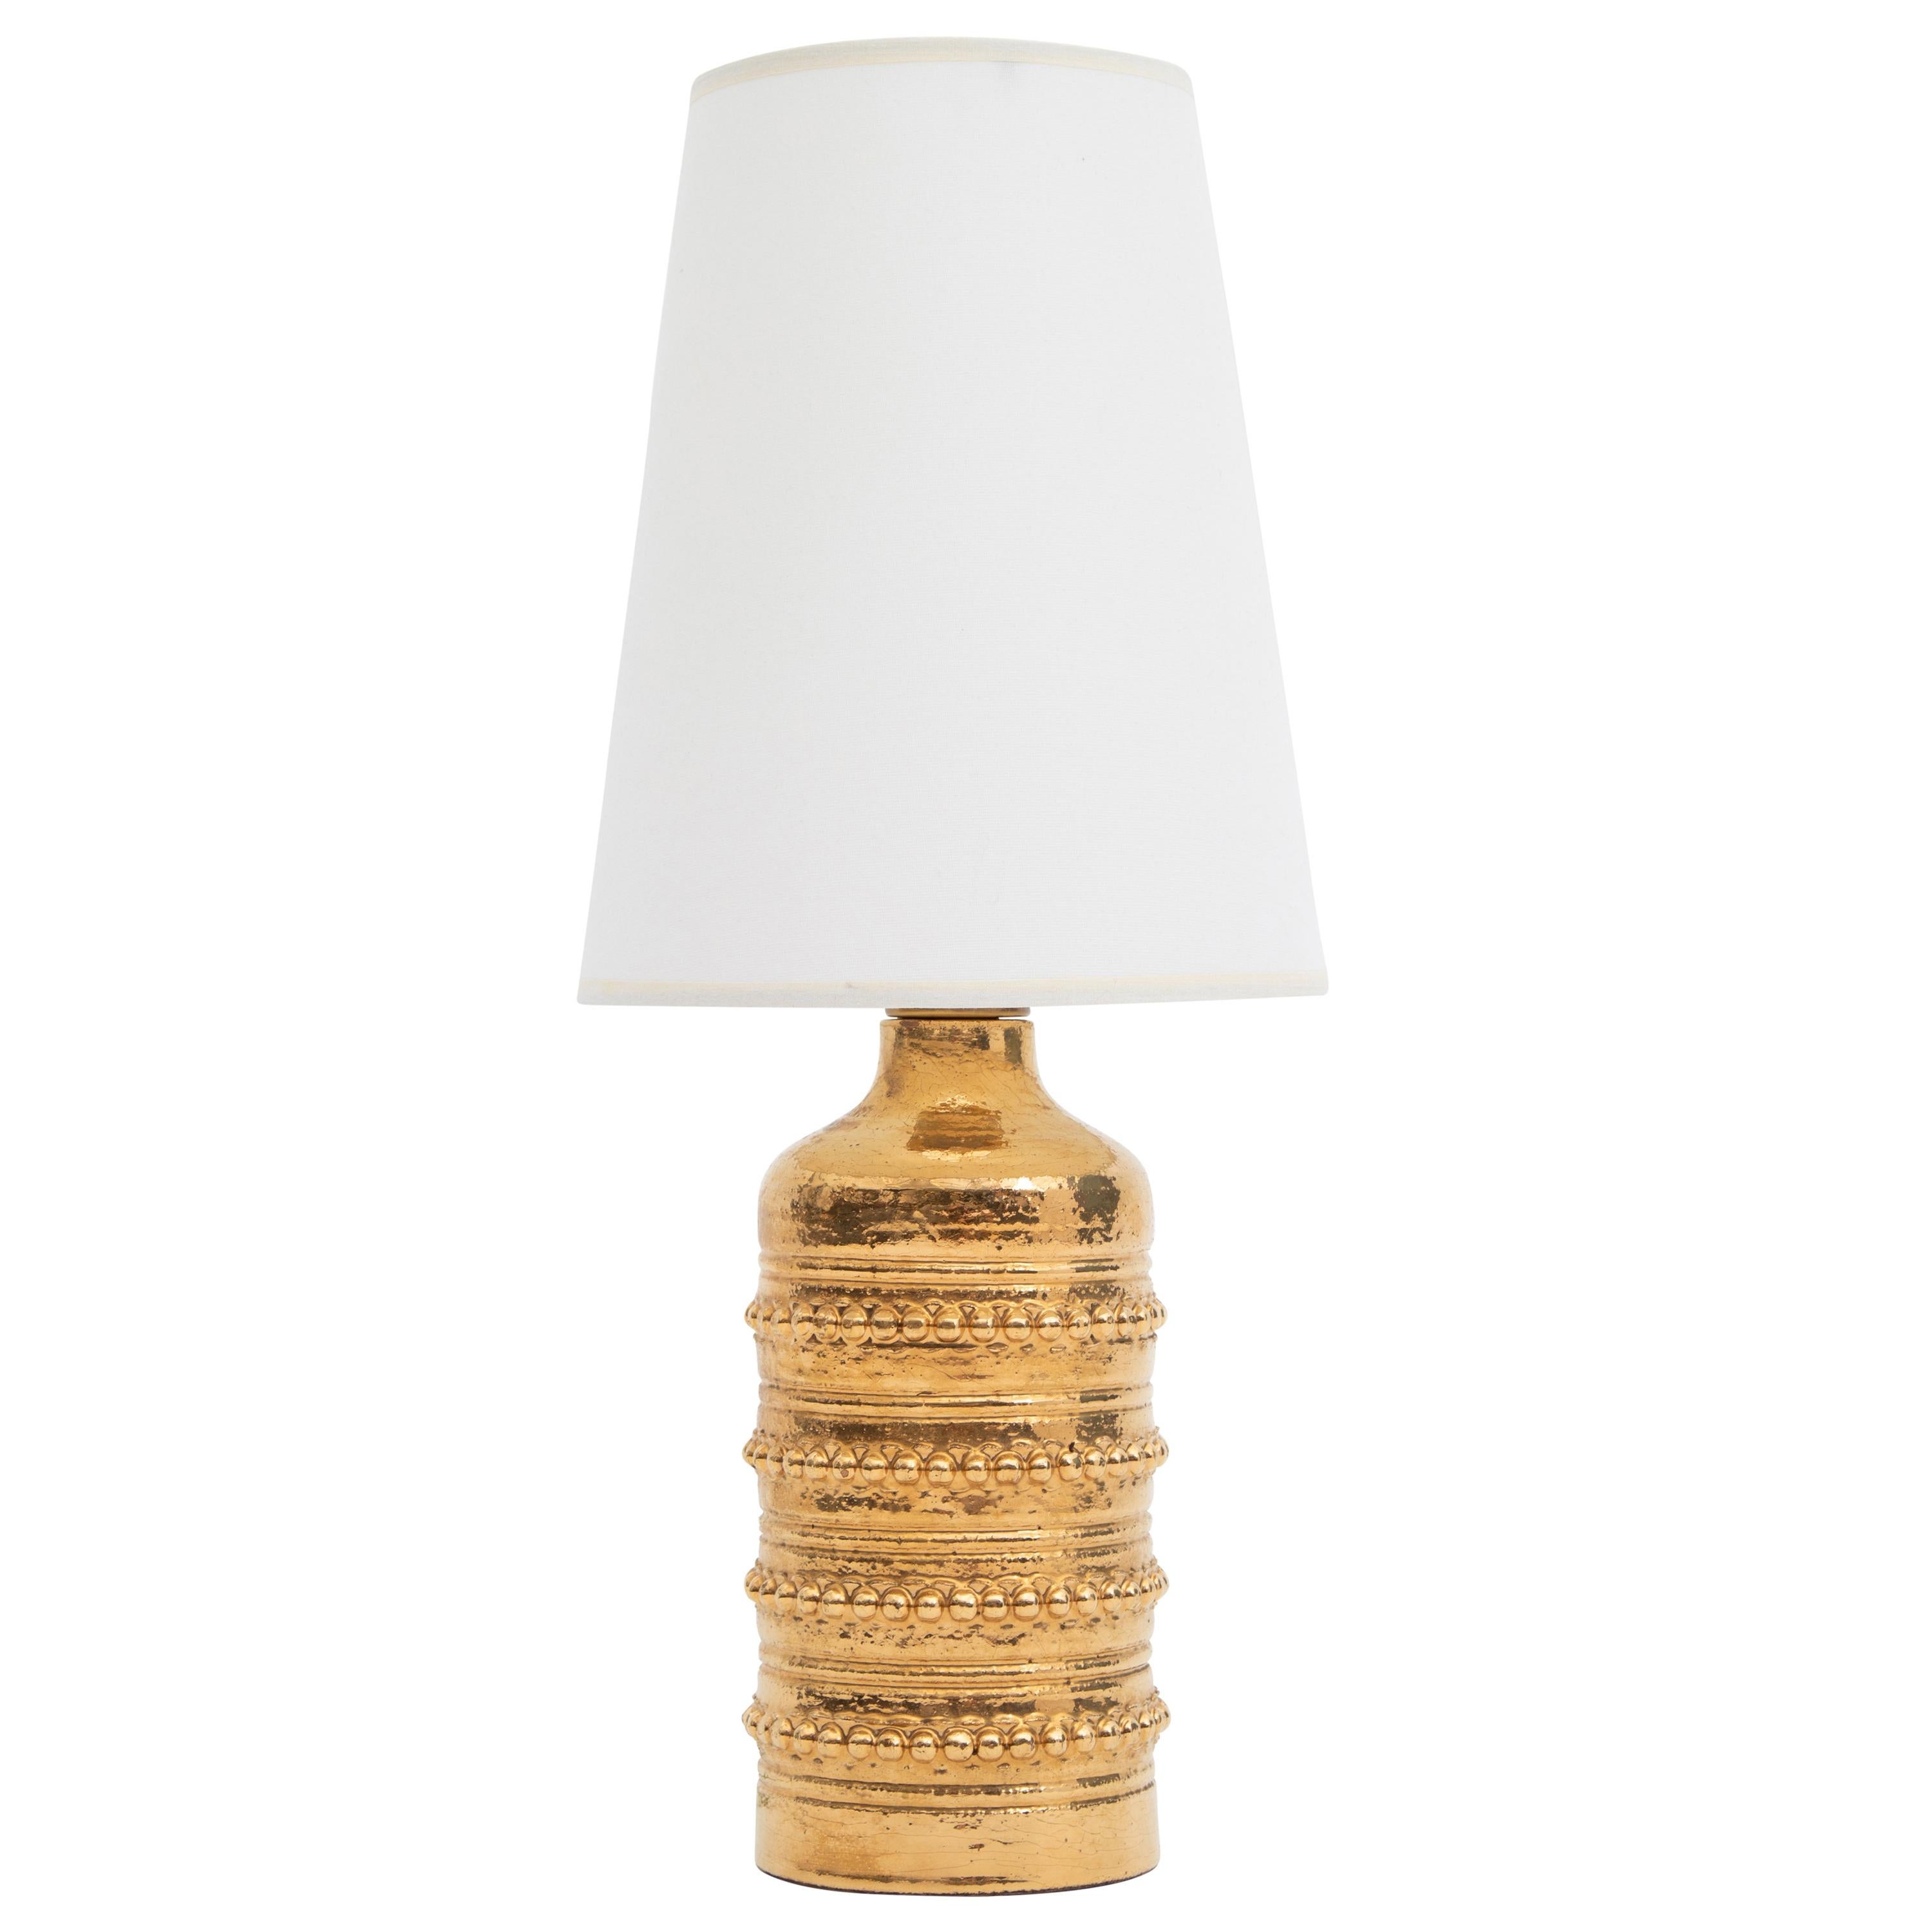 Gold-Glazed Ceramic Table Lamp by Falkenbergs Belysning of Sweden, circa 1960s For Sale